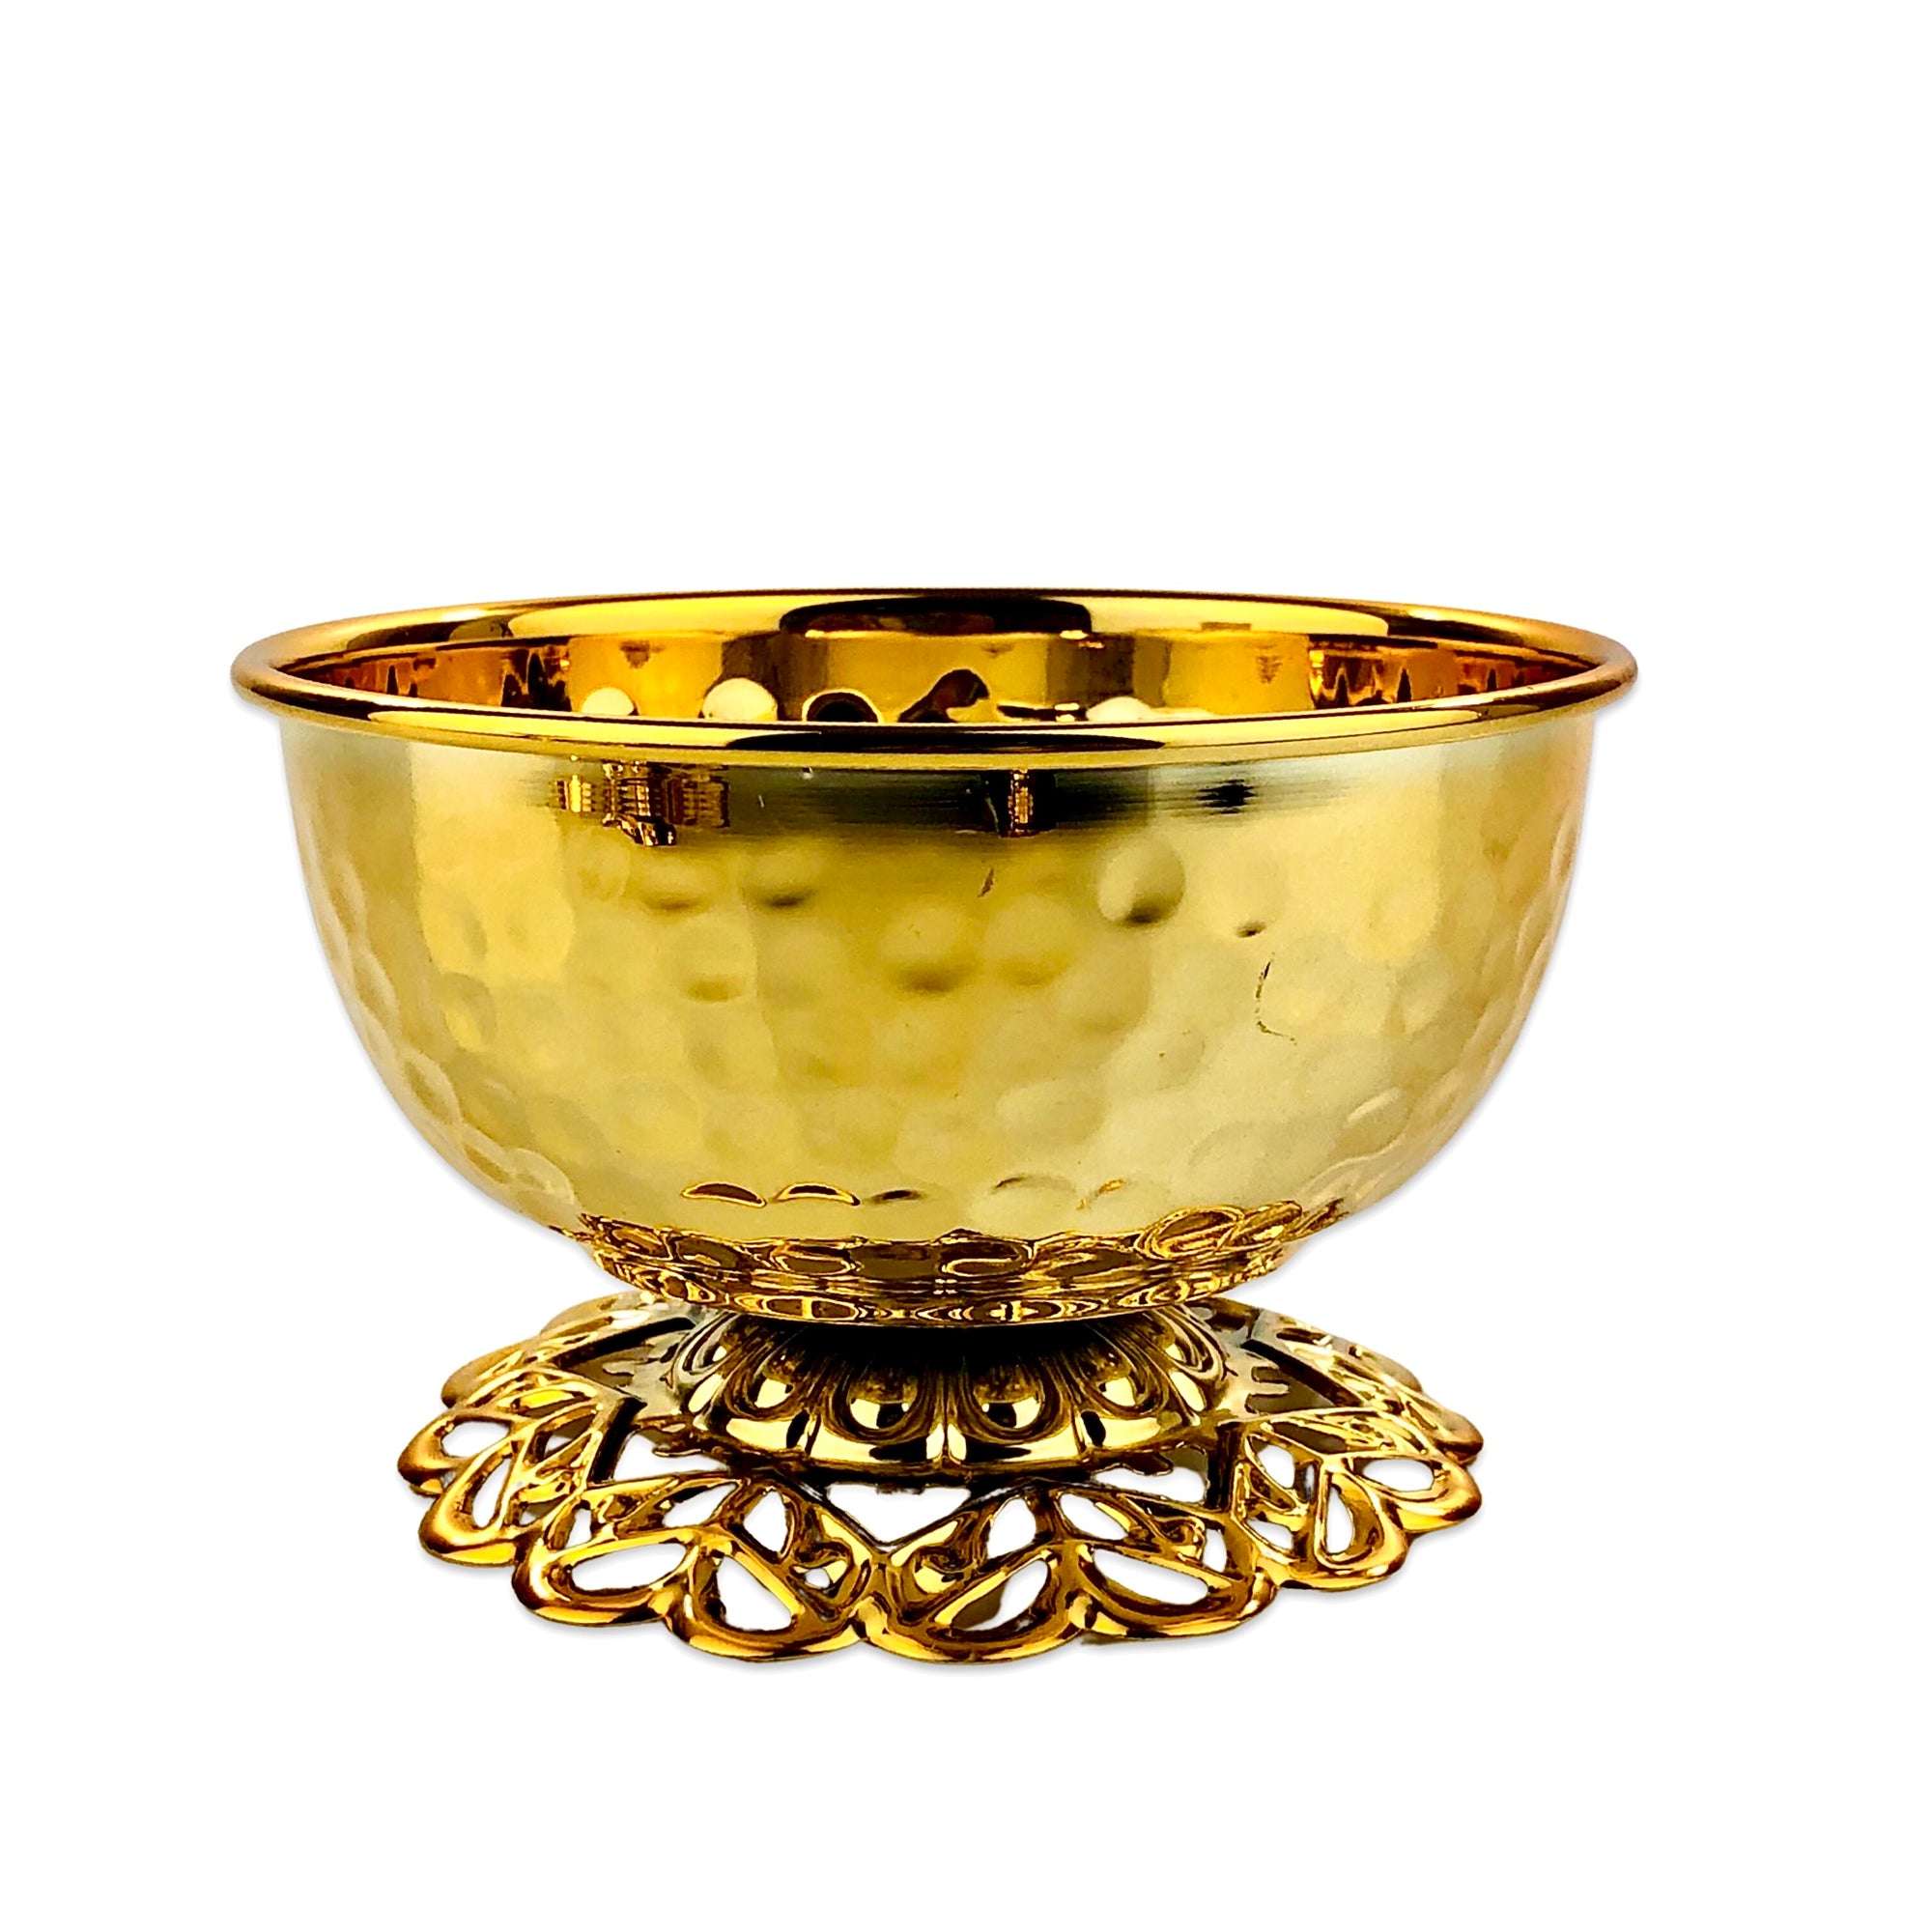 Hammered Golden Small Bowl